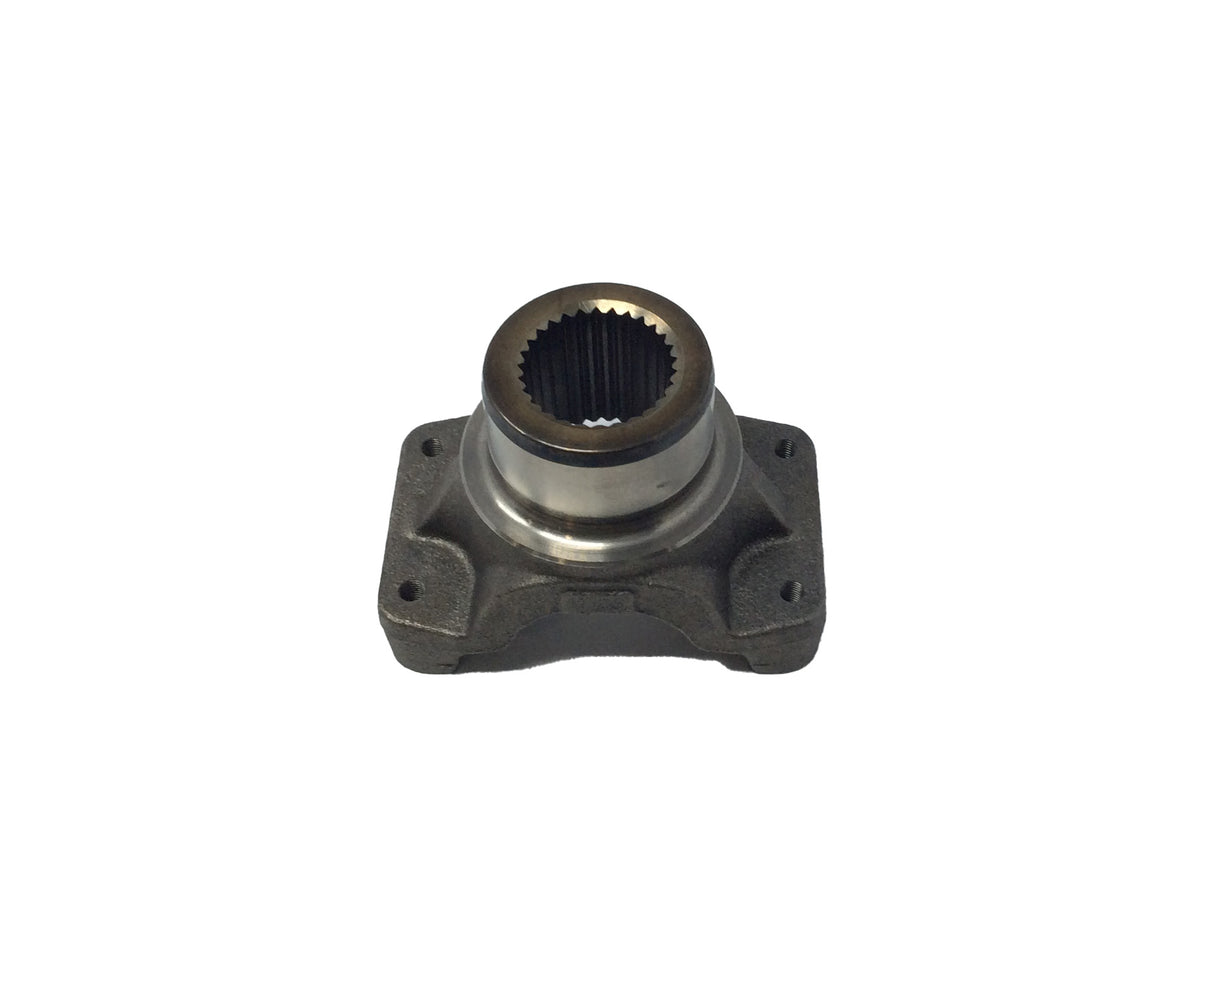 DANA - SPICER HEAVY AXLE ­-­ 2-4-4031-1 ­-­ DIFFERENTIAL END